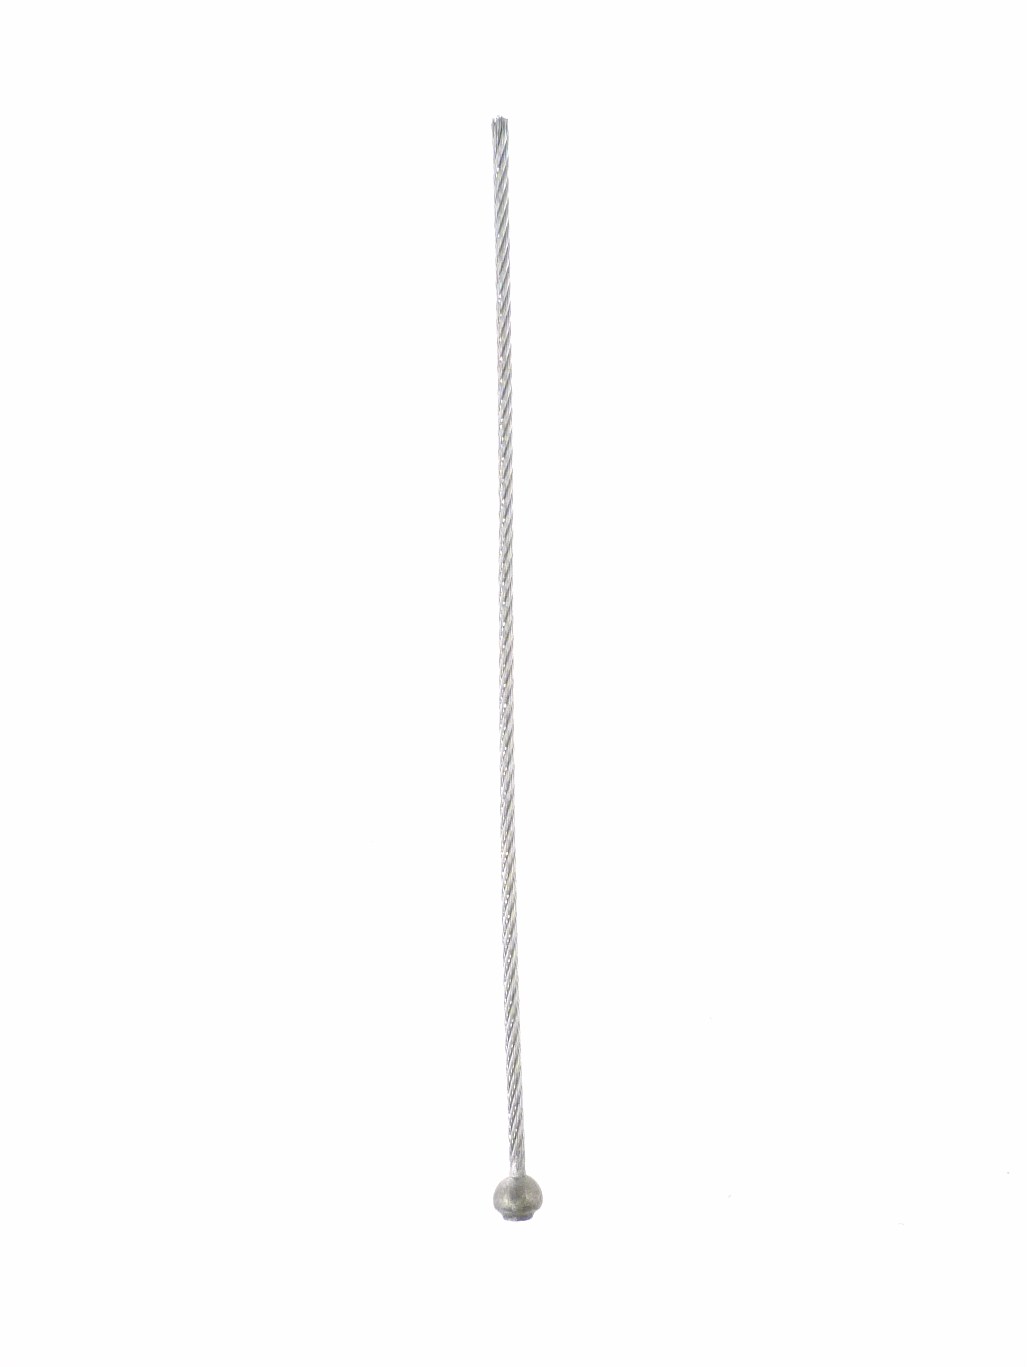 14" CABLE WITH BALL-END.